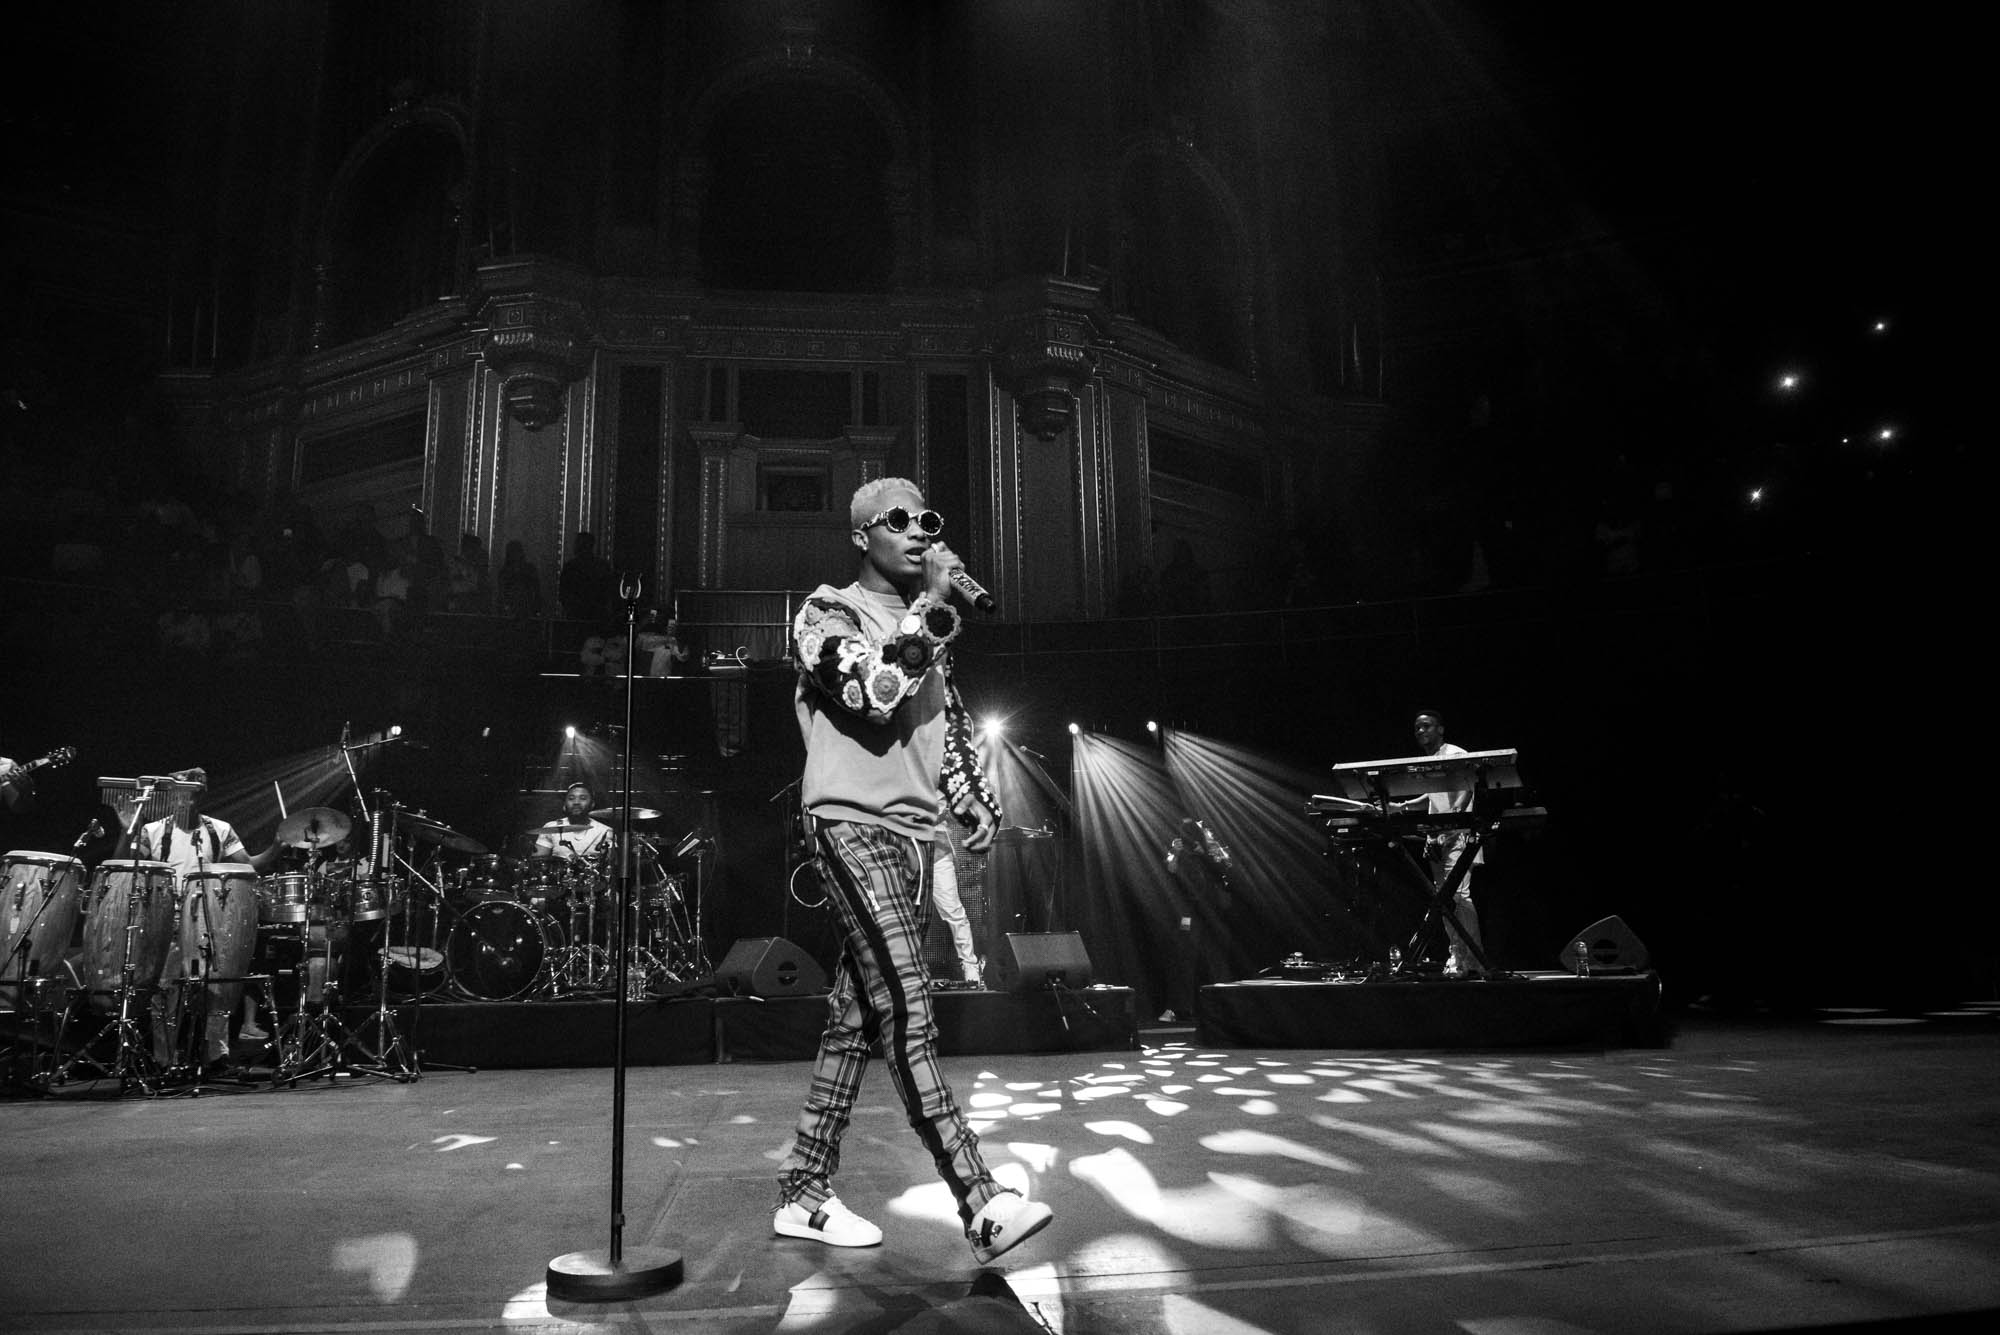 London, United Kingdom. 29th September 2017. WIZKID Performing Live At The Royal Albert Hall. Photographed Michael Tubes.